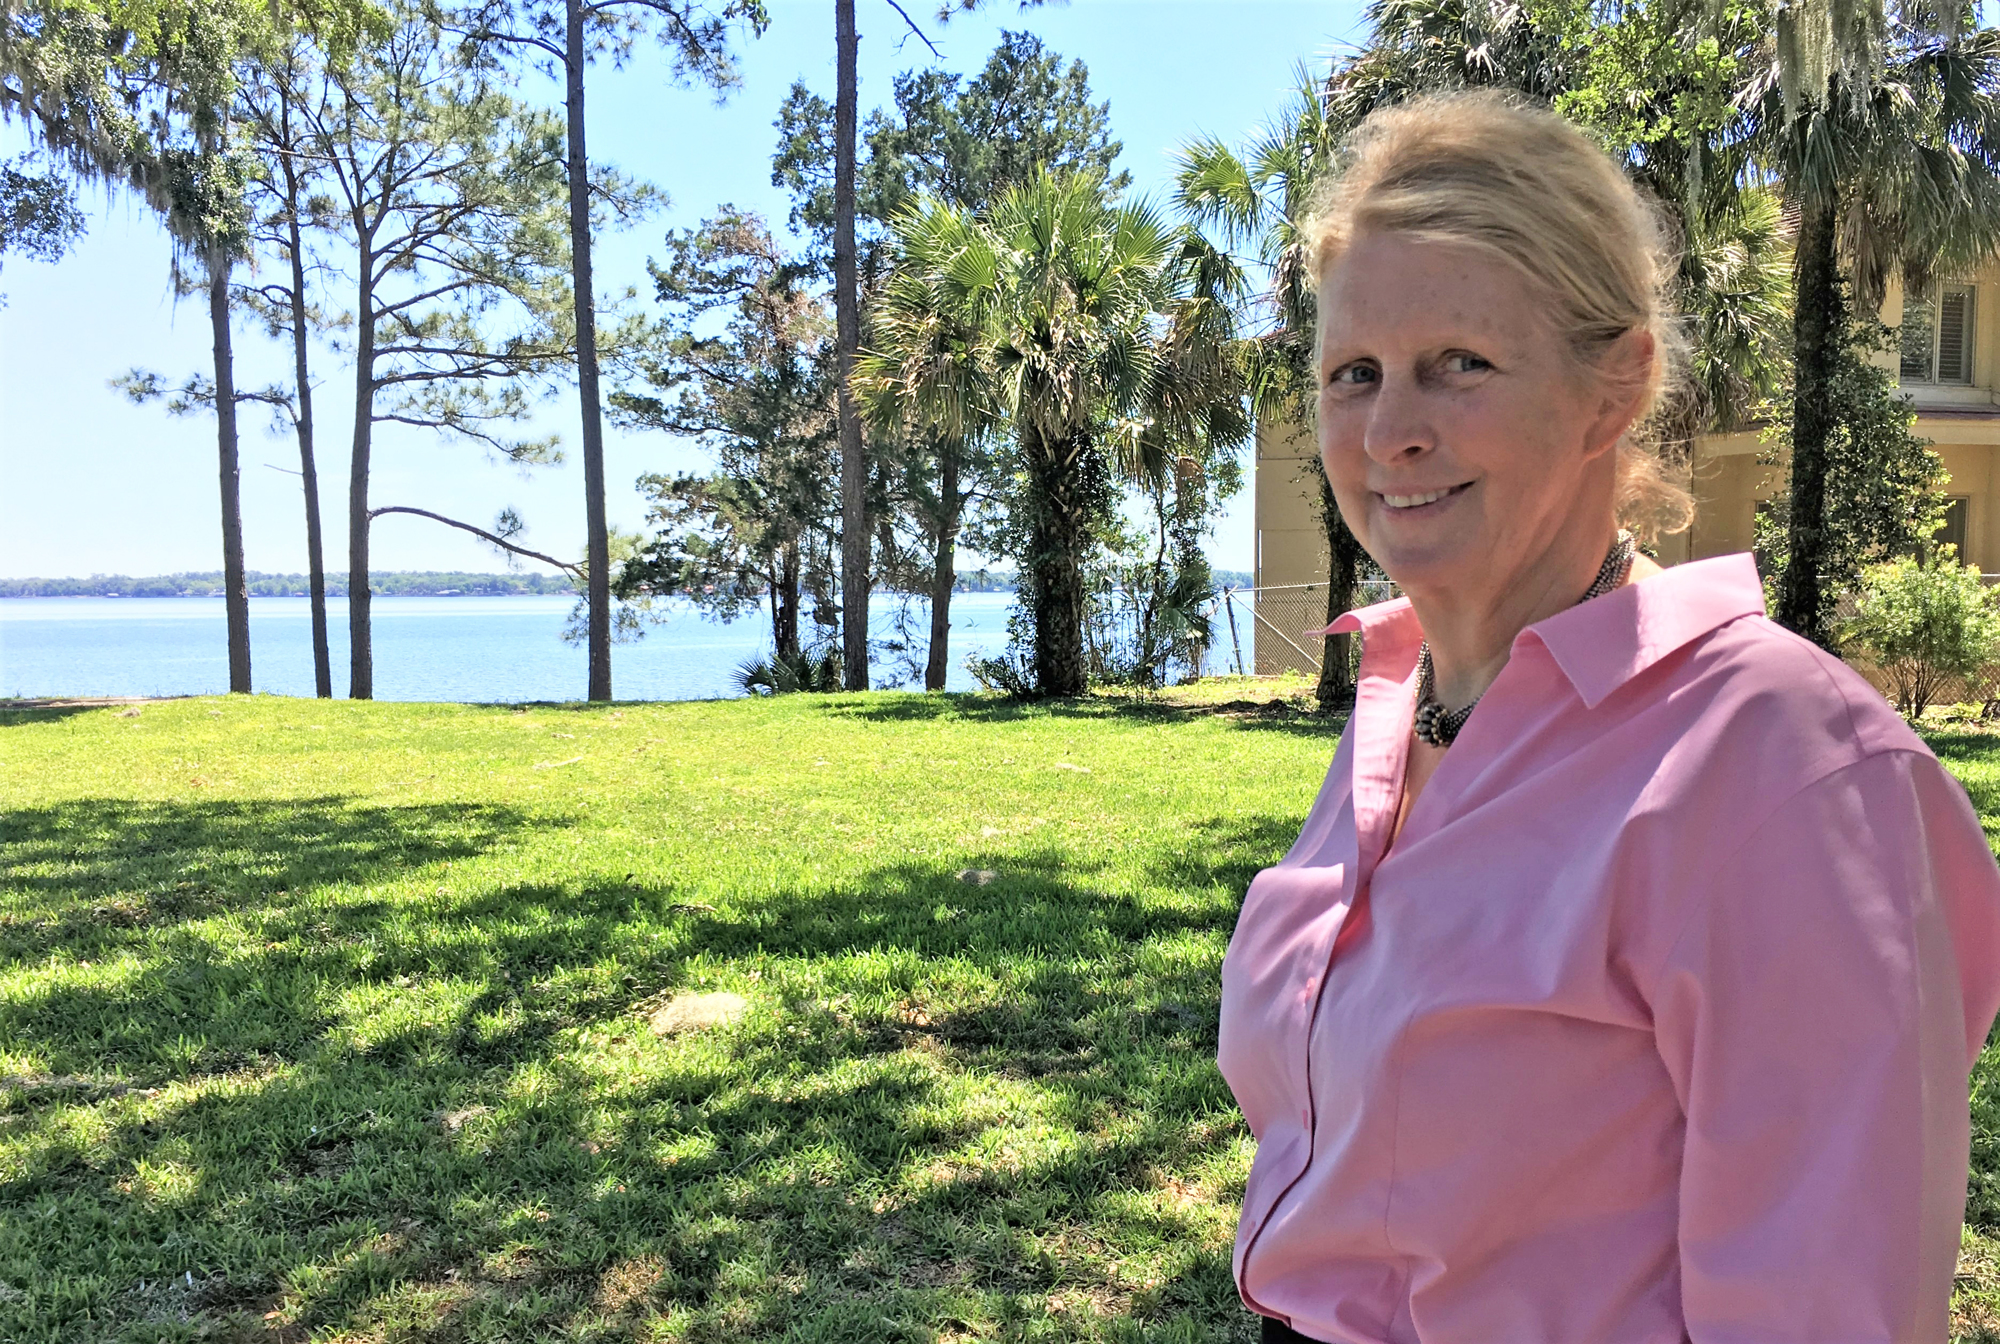 Karrie Massee shows off the riverfront views at Azaleana Manor.